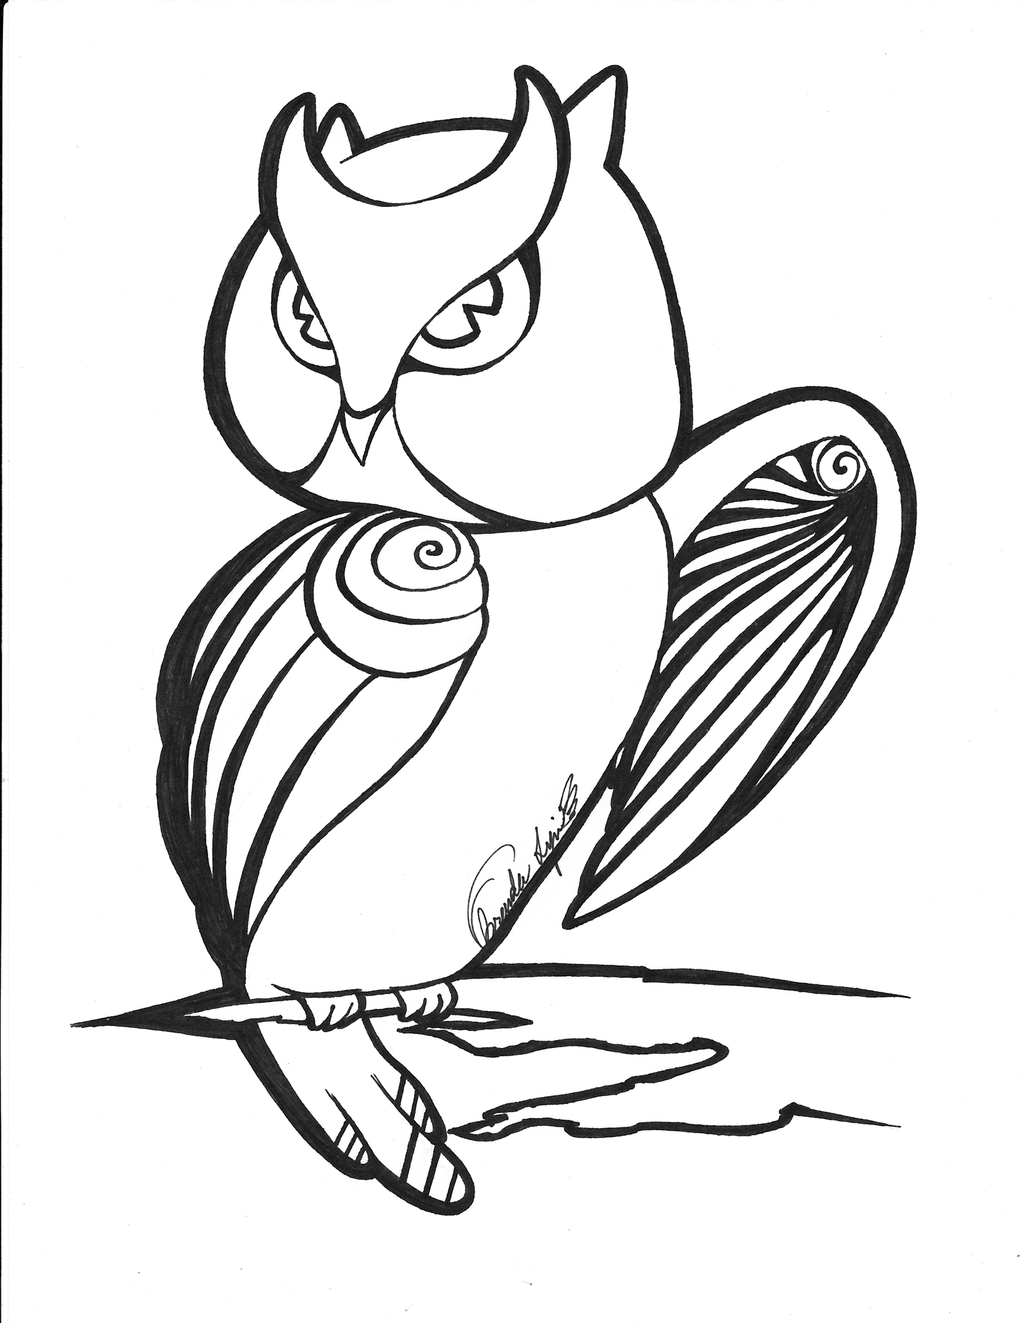 Free Owl Outline, Download Free Owl Outline png images, Free ClipArts